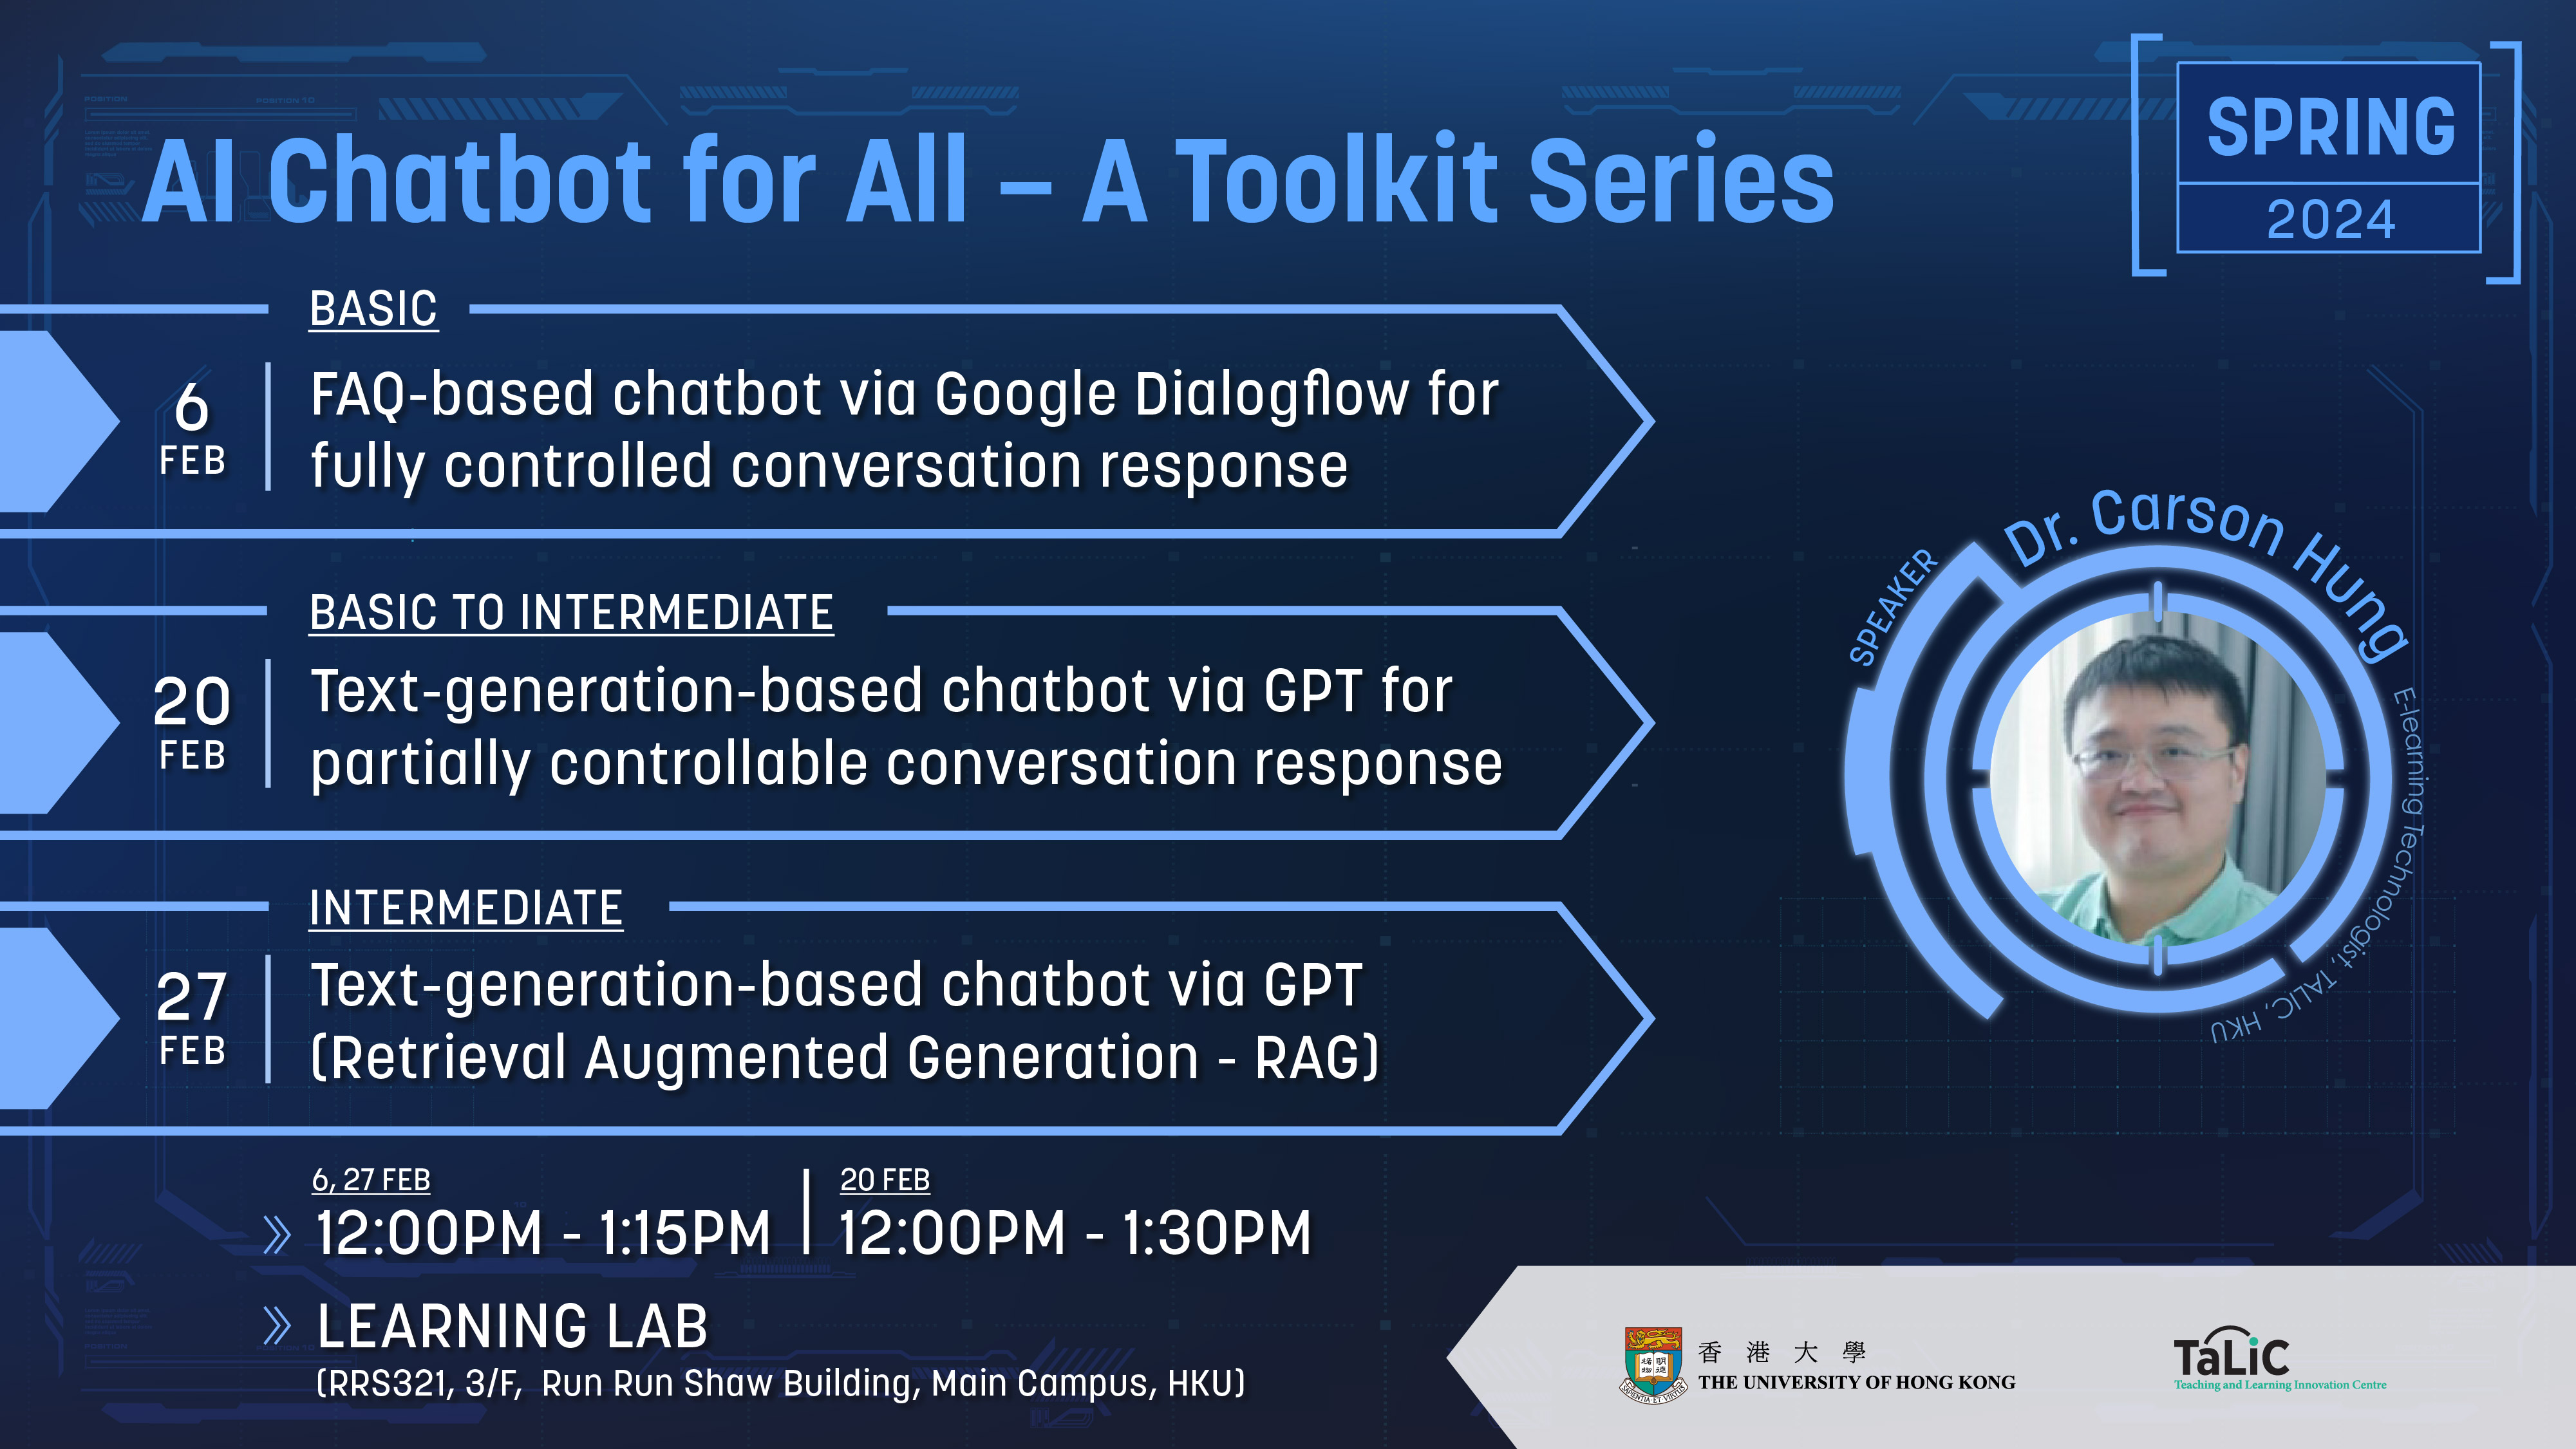 AI Chatbot for All – A Toolkit Series